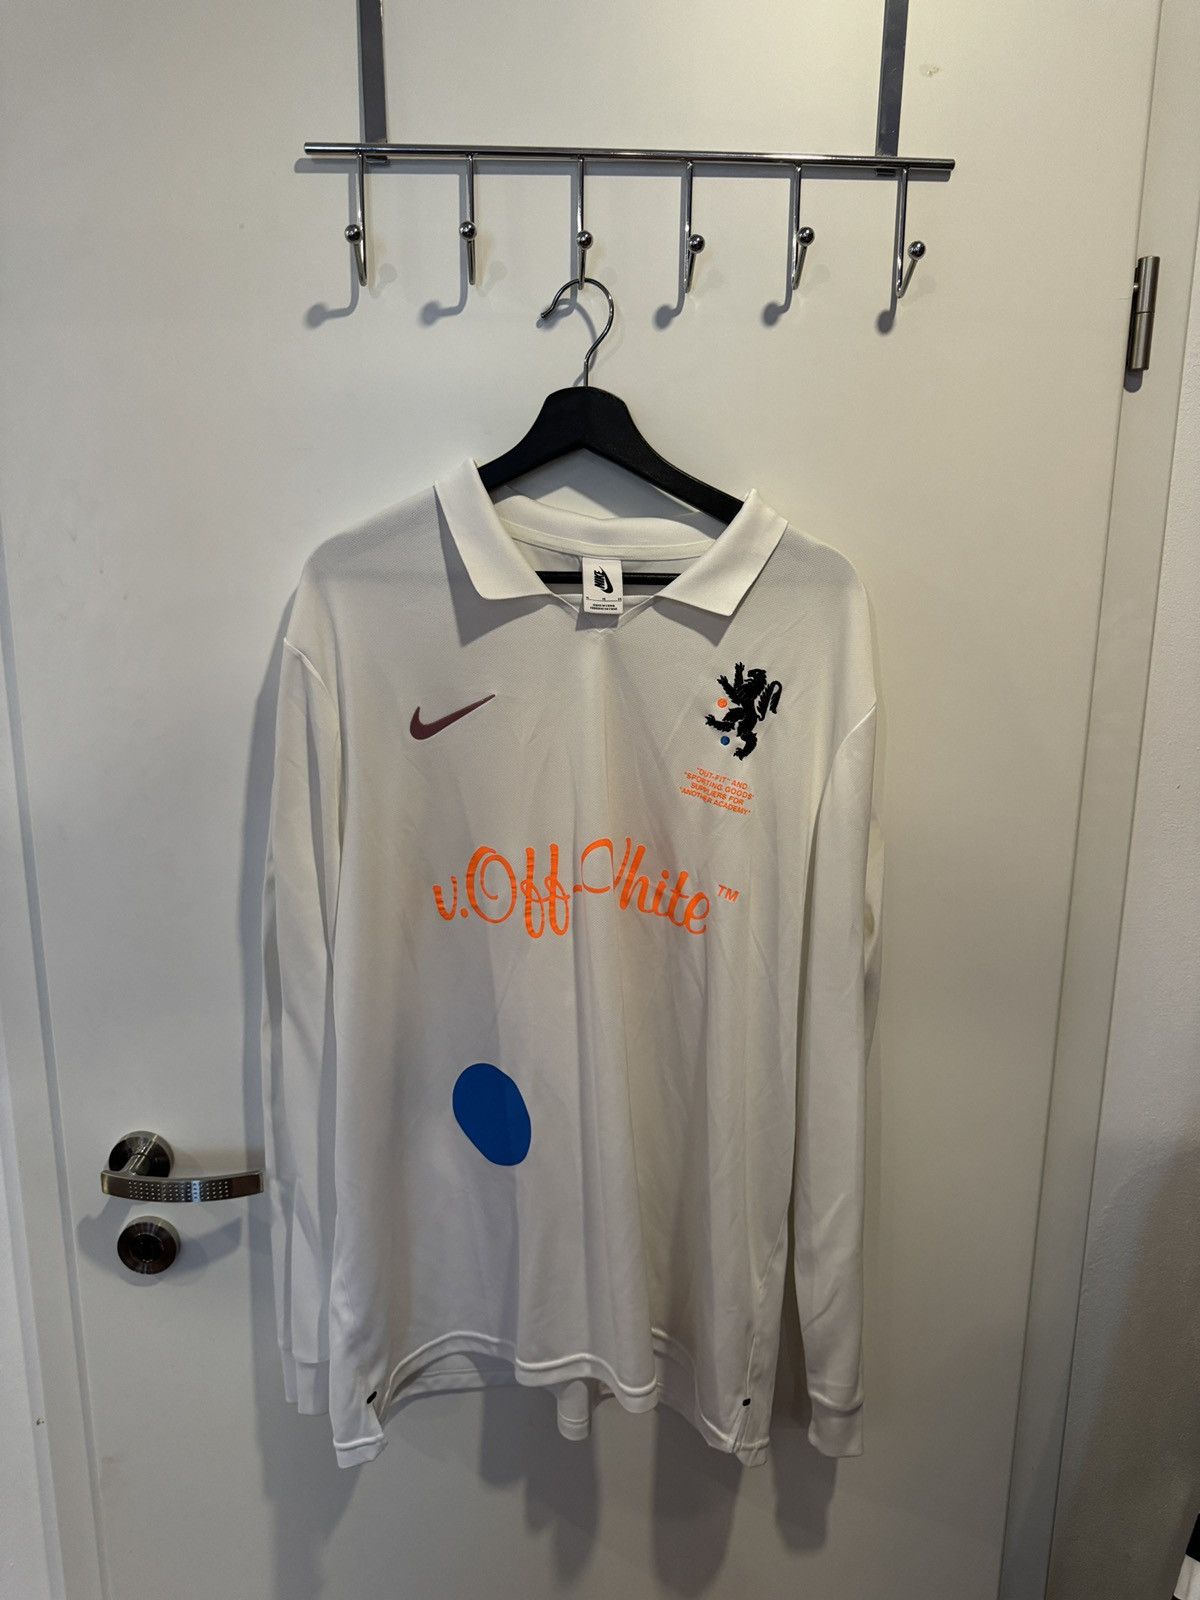 Nike Off White Mercurial Nrg Fb Jersey | Grailed